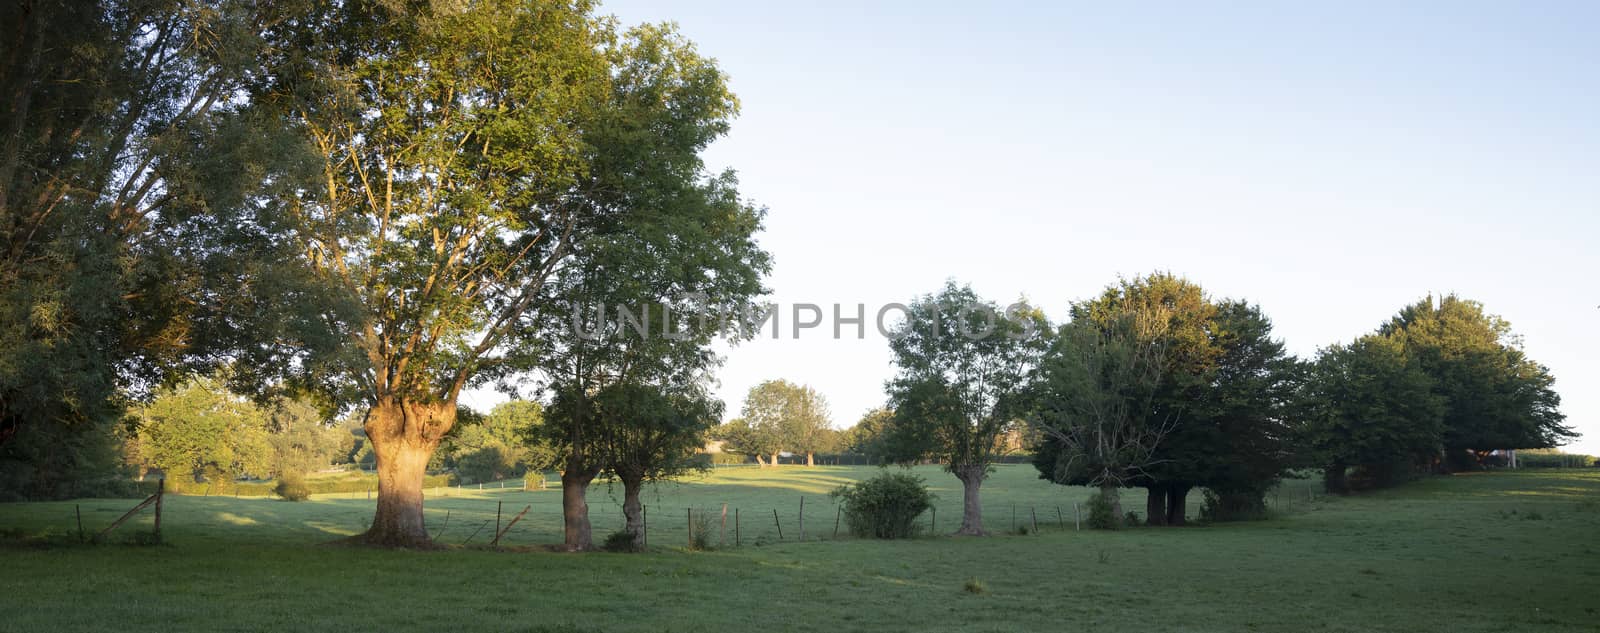 rural countryside landscape with trees in the nort of france near valenciennes by ahavelaar